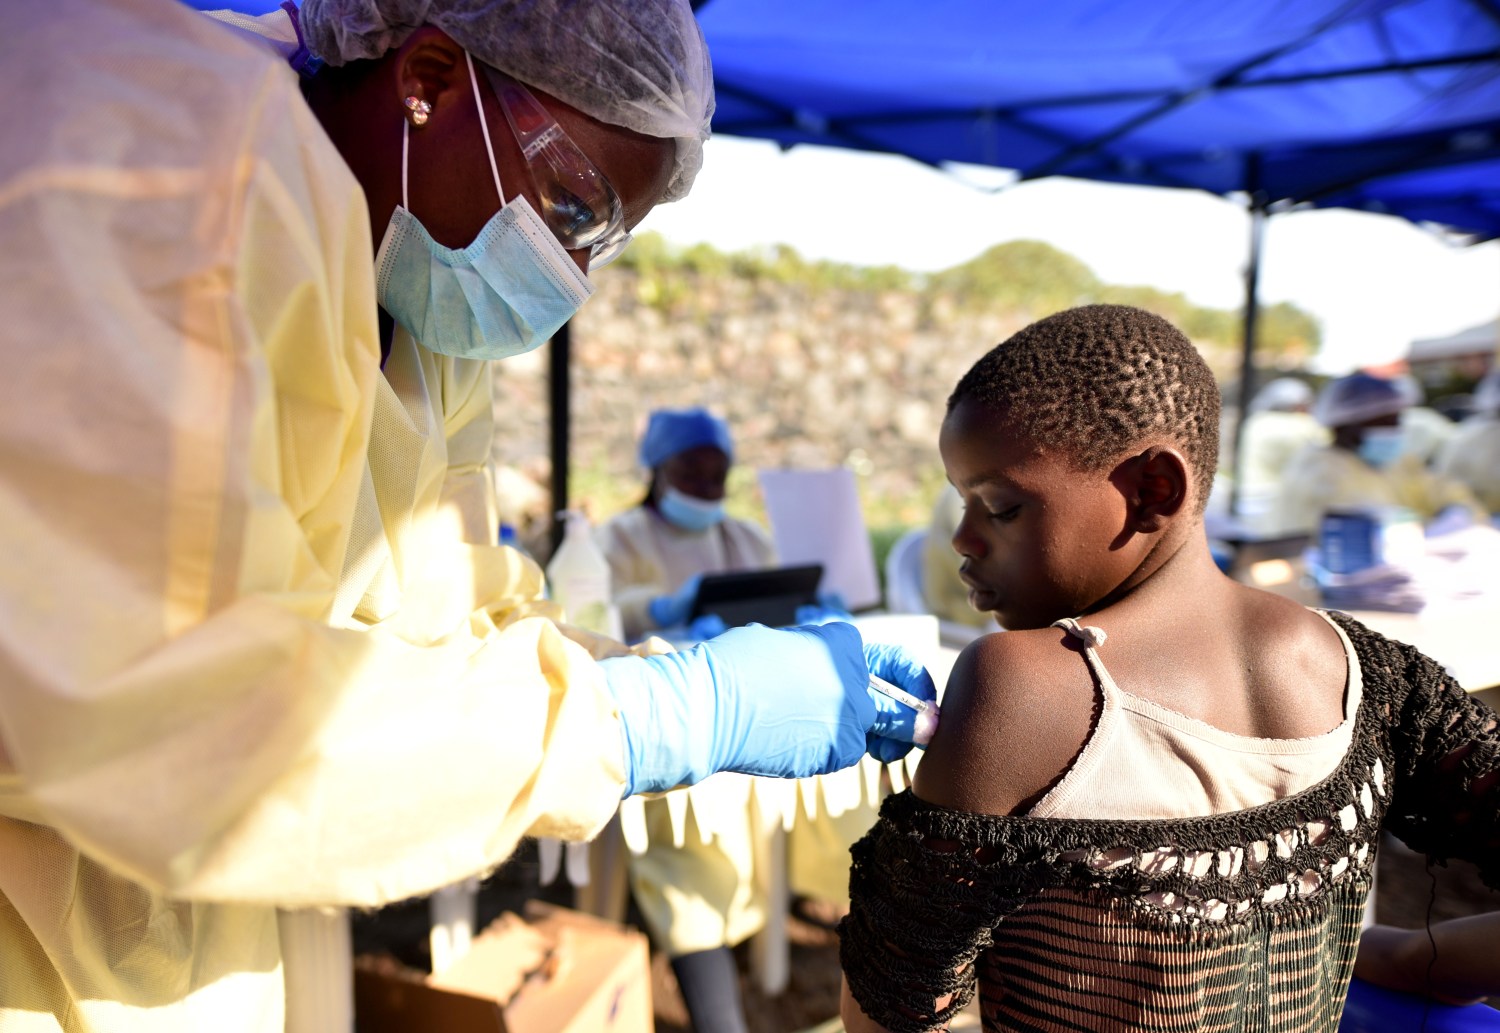 A Congolese health worker administers ebola vaccine to a child at the Himbi Health Centre in Goma, Democratic Republic of Congo, July 17, 2019. REUTERS/Olivia Acland - RC1FDEE57DA0